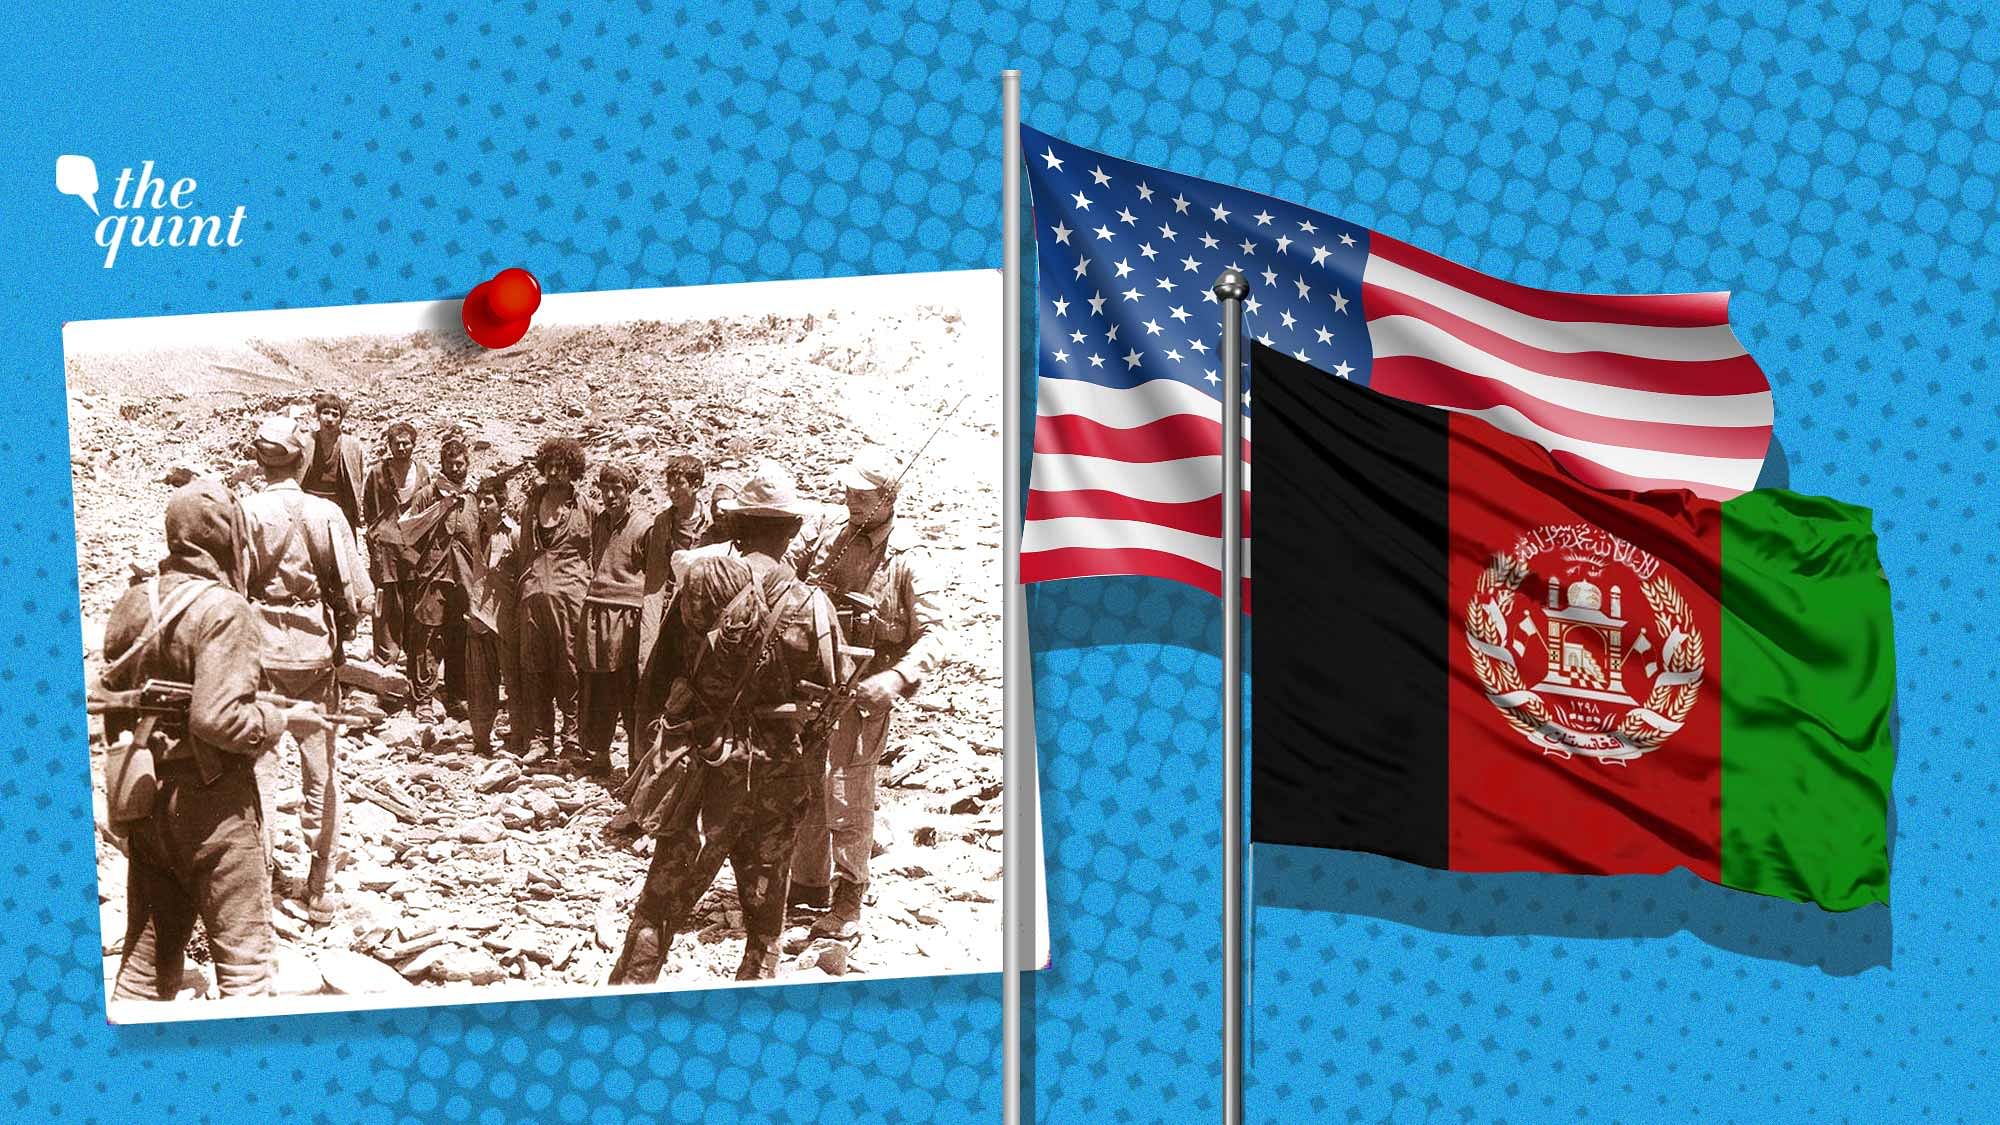 Image of Soviet-Afghan war (L), US and Afghan flags (R) used for representational purposes.